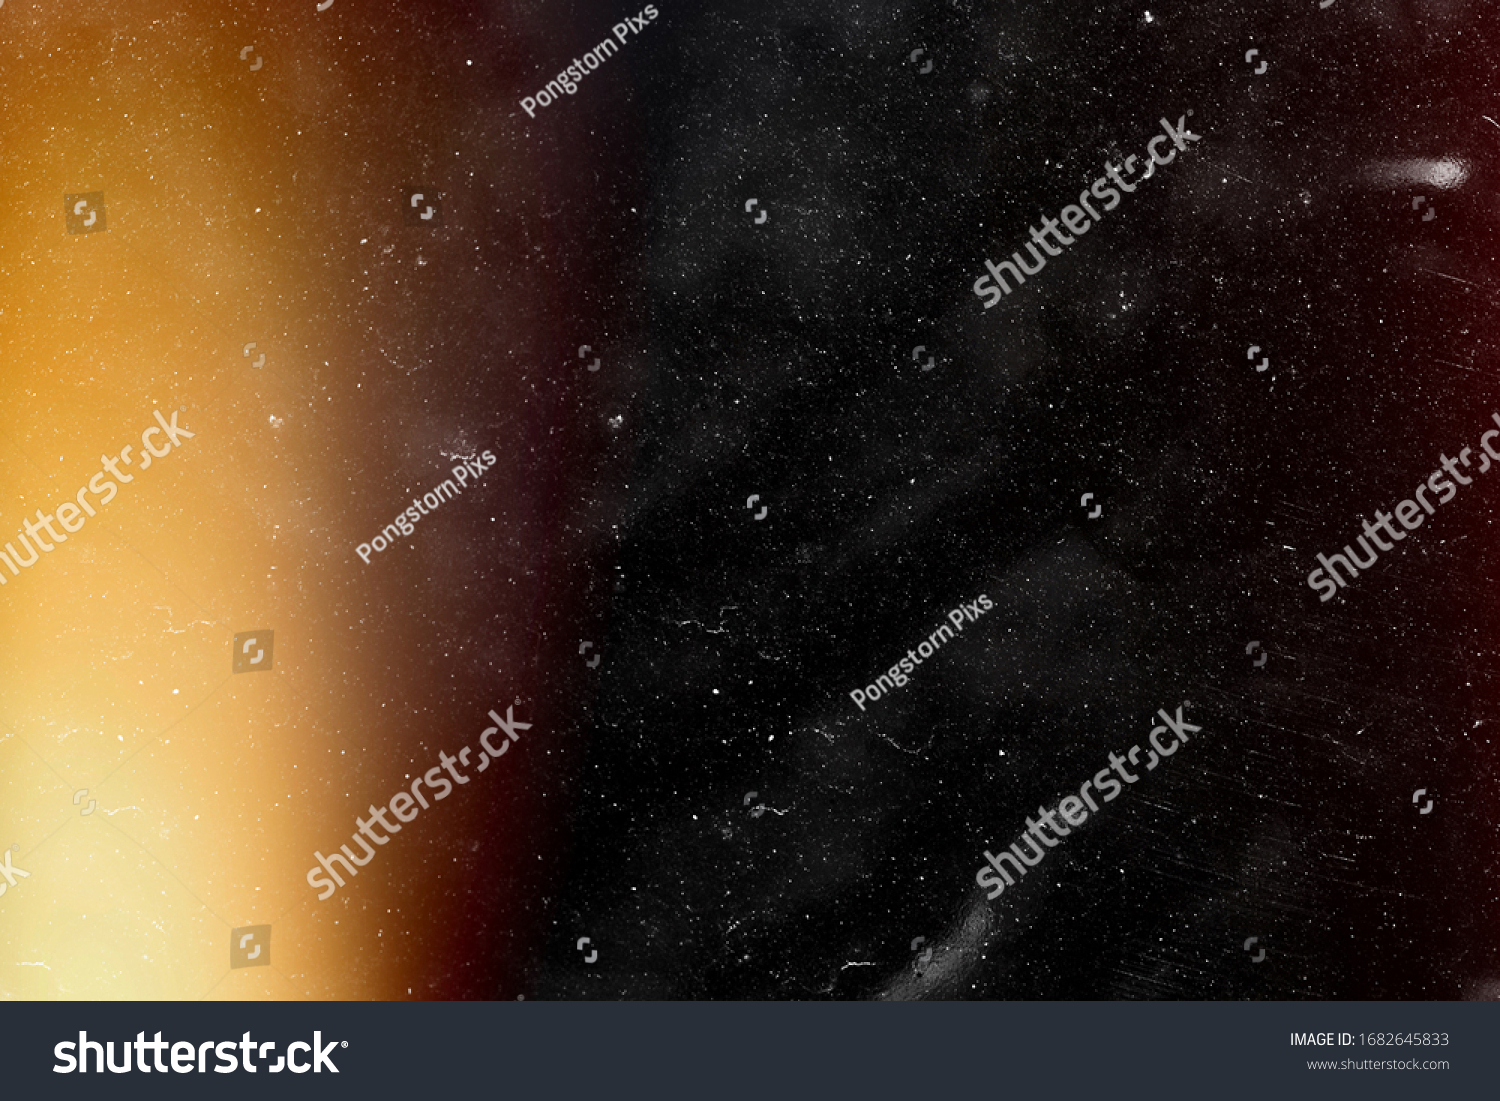 Designed film texture background with heavy grain, dust and a light leak Real Lens Flare Shot in Studio over Black Background. Easy to add as Overlay or Screen Filter over Photos overlay #1682645833